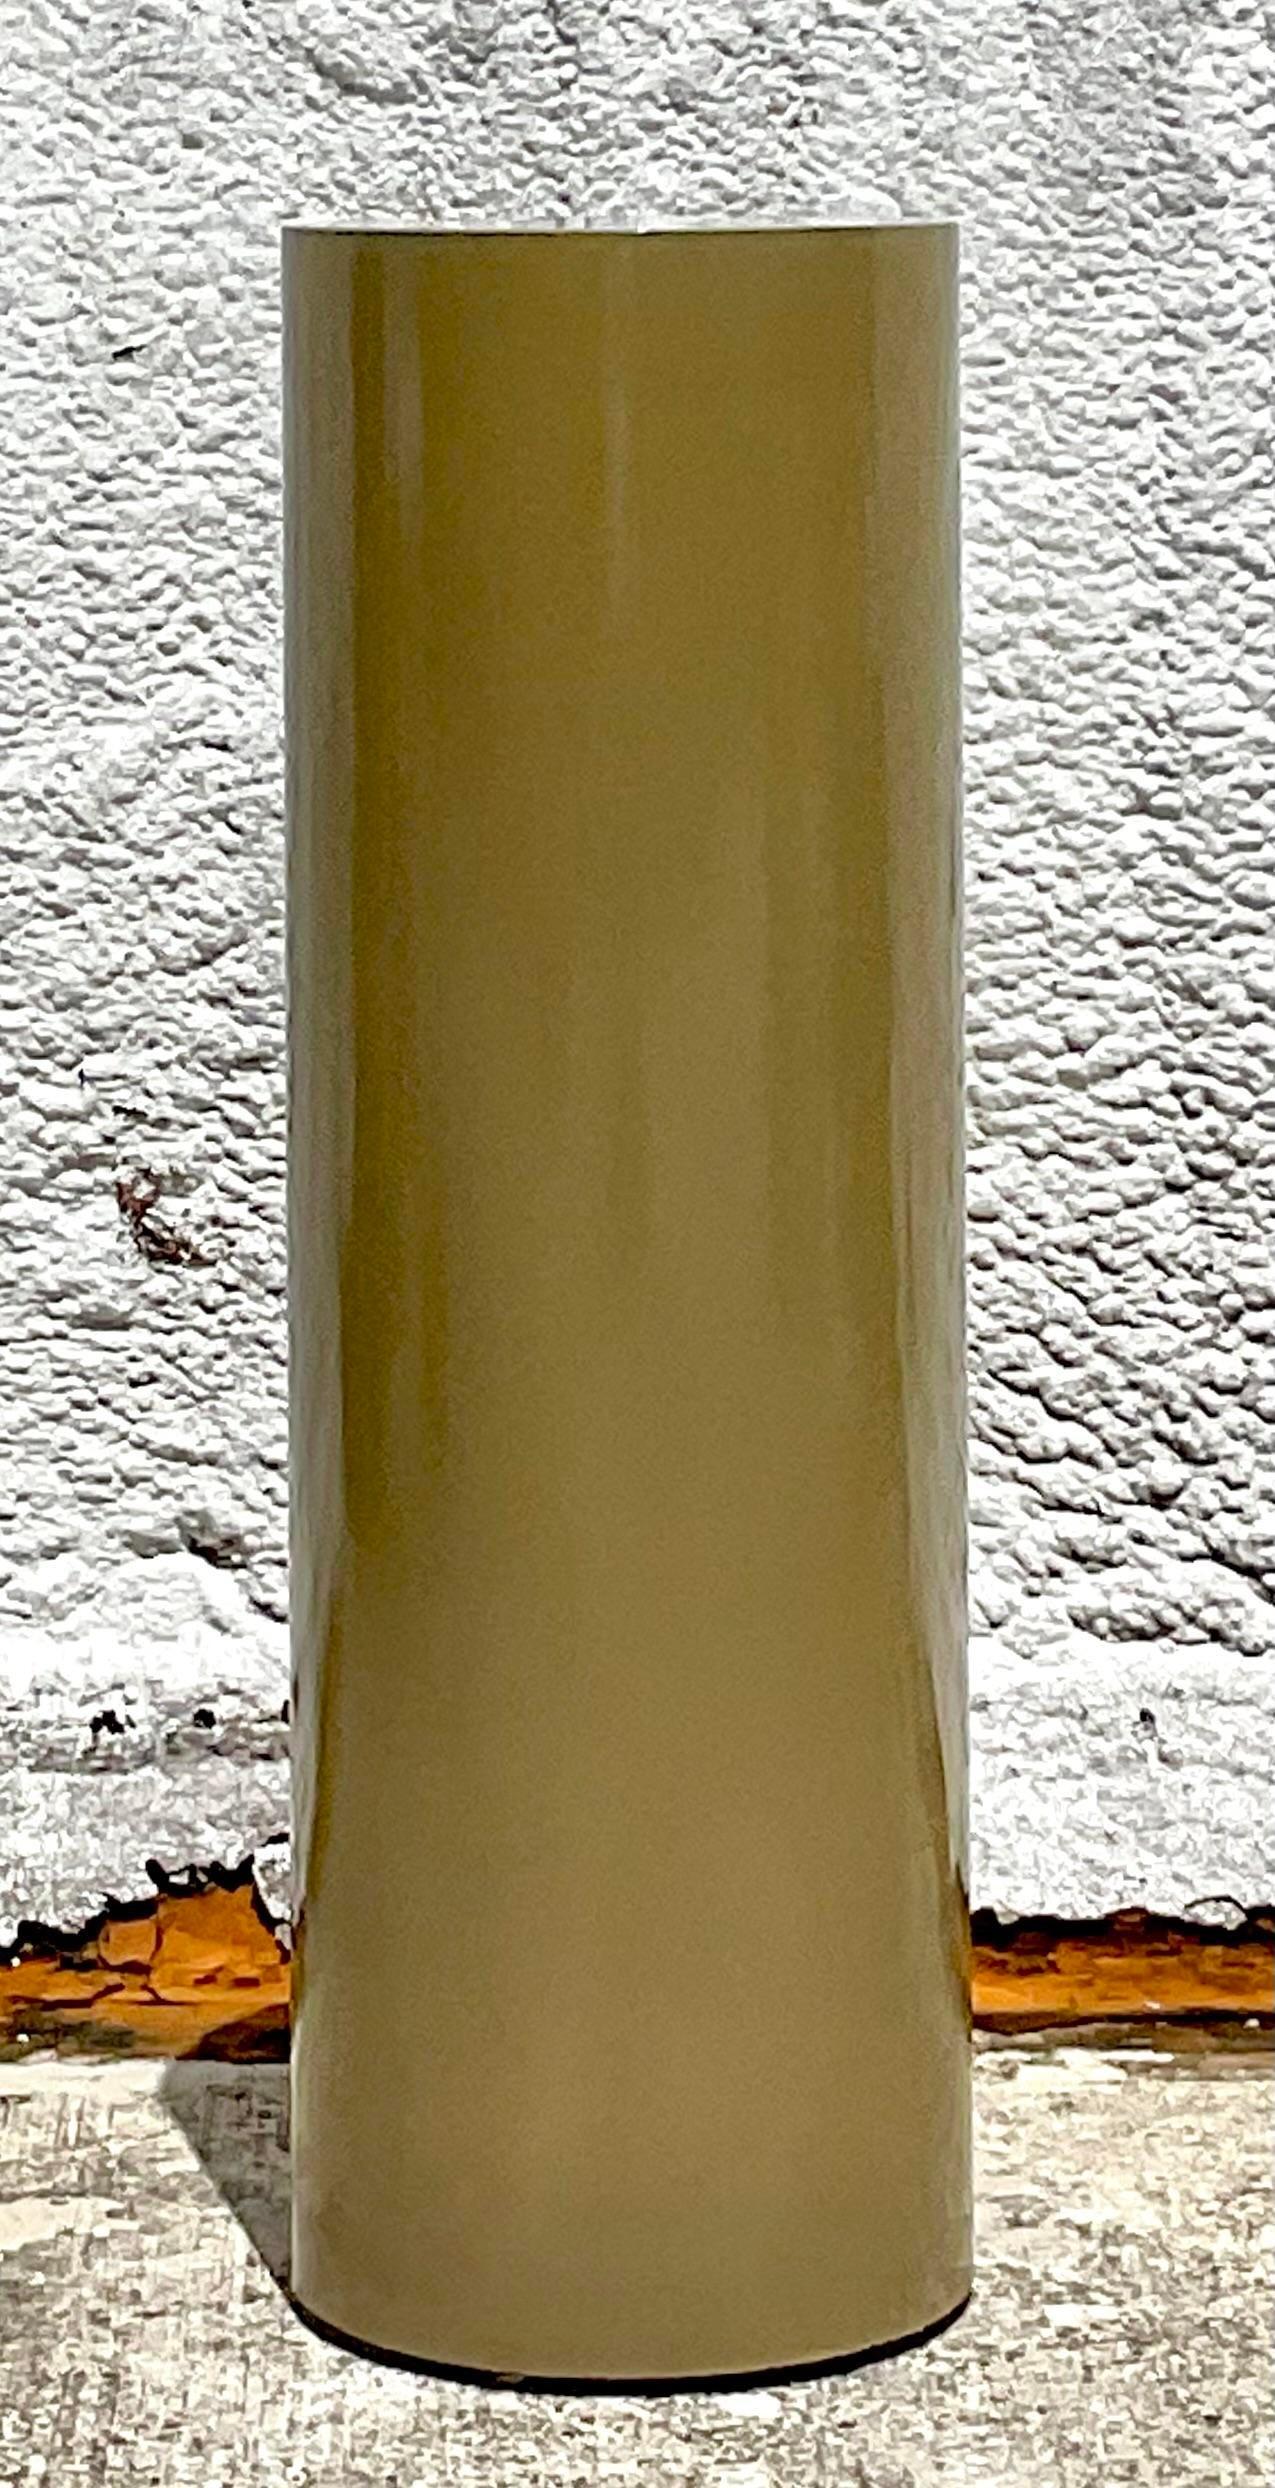 A fantastic vintage boho pedestal. A beautiful pale olive green in a lacquered finish. A chic cylinder shape makes it an easy addition to any project. Acquired from a Palm Beach estate.